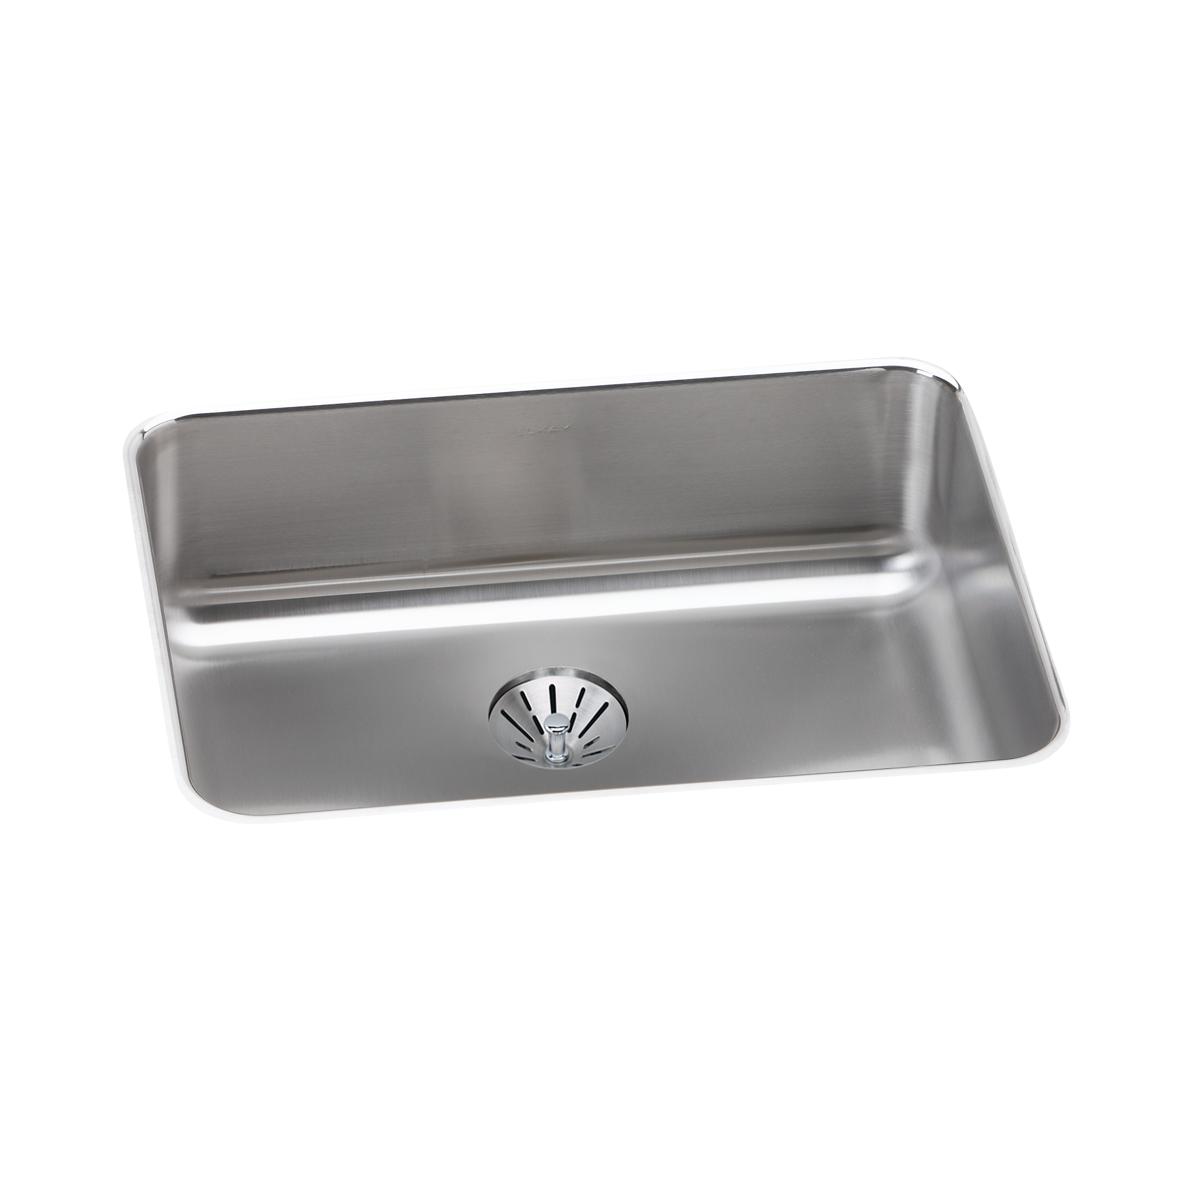 Elkay Lustertone Classic Stainless Steel 25-1/2" x 19-1/4" x 8" Single Bowl Undermount Sink with Perfect Drain